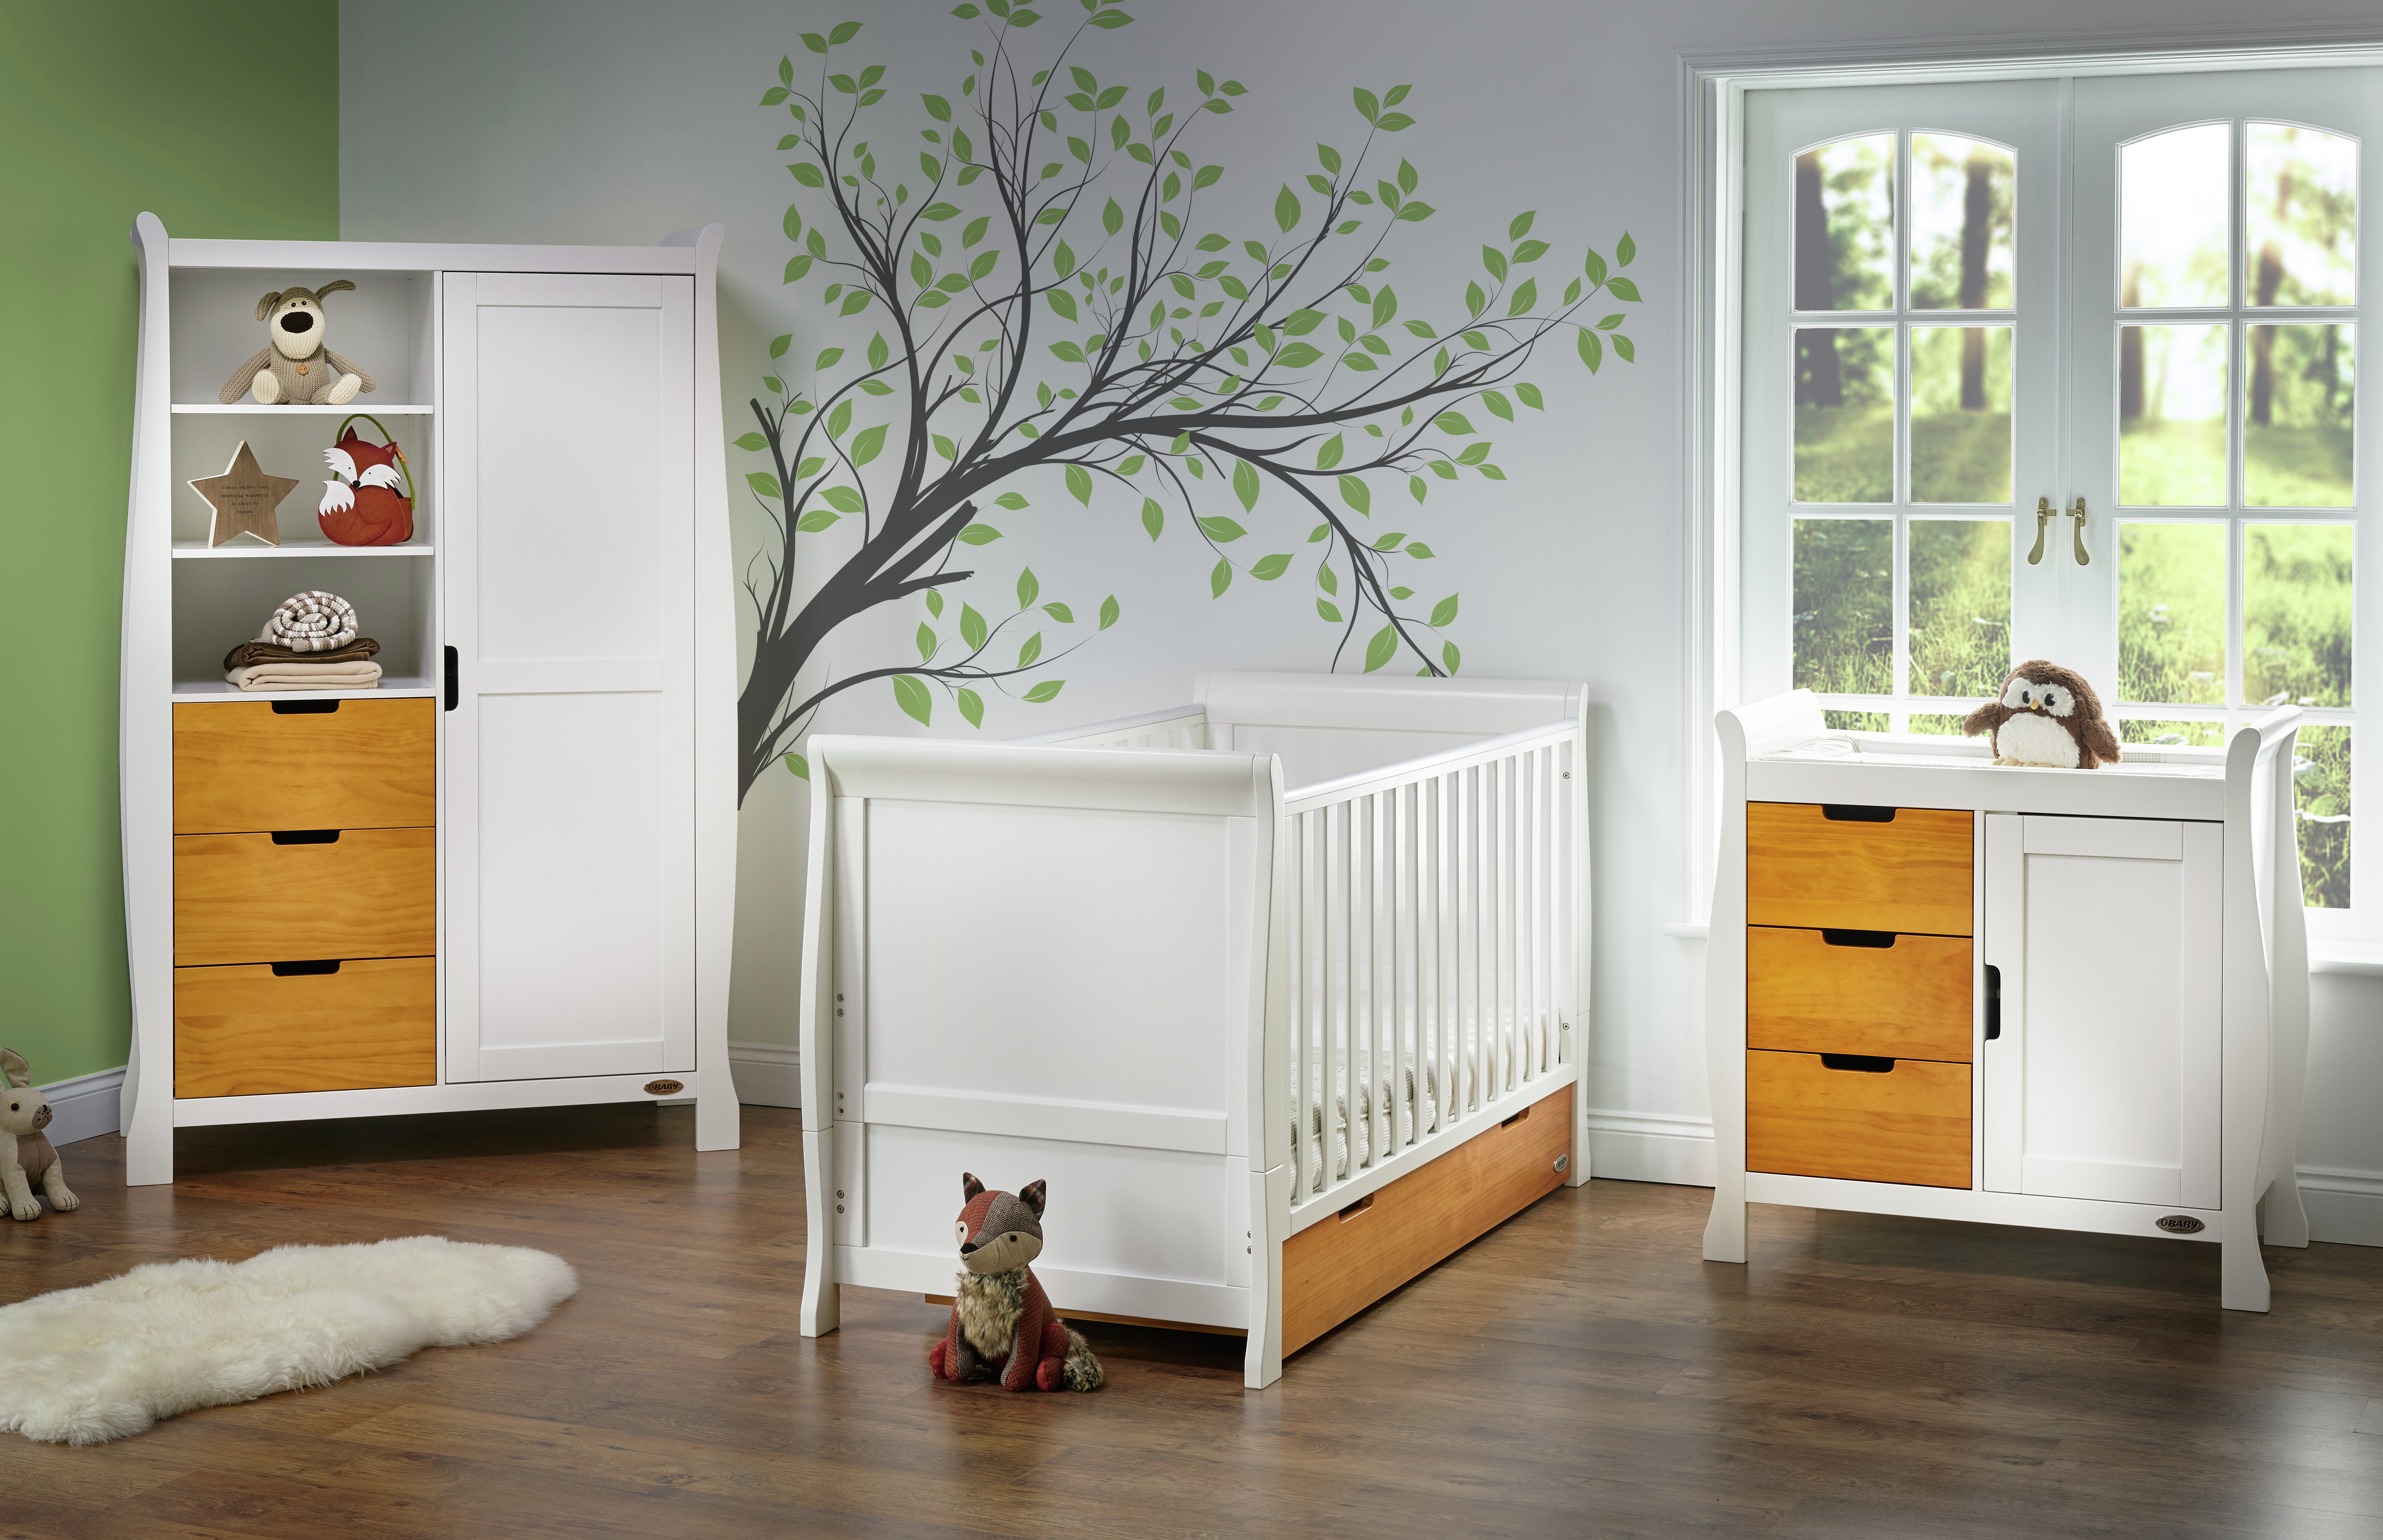 Obaby Stamford 3 Piece Room Set - White with Country Pine